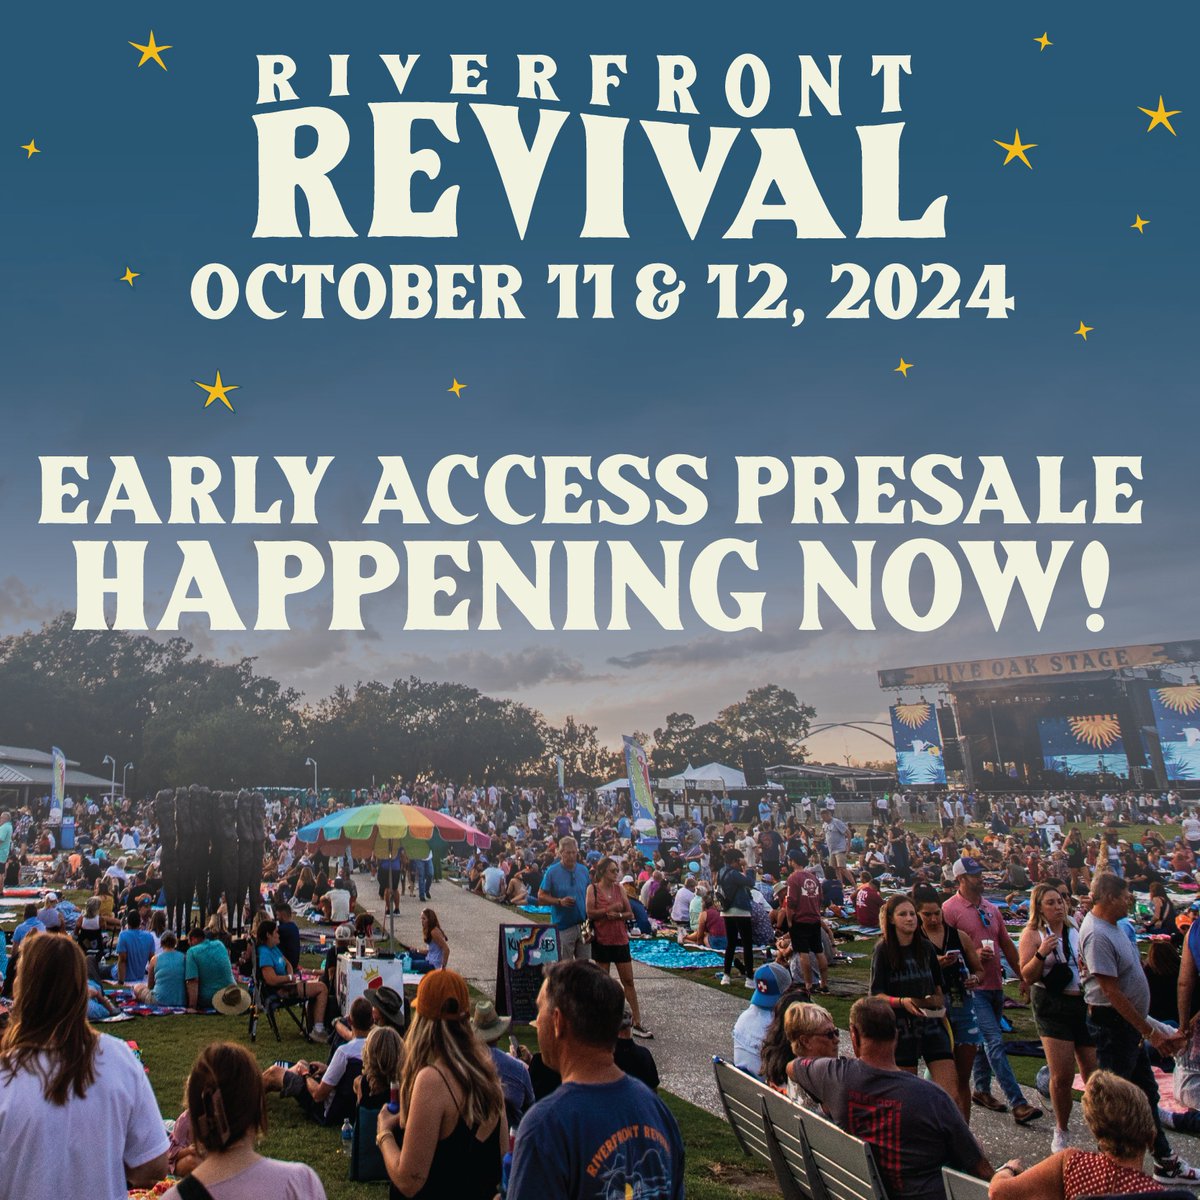 We're Back For 2024! Join us Oct 11 & 12 for the 3rd Annual Riverfront Revival 🌊 Early Access Presale is HAPPENING NOW! GA, GA+, and VIP Tier 1 priced weekend passes are on sale now! Click here👉 bit.ly/4bLmD4a to sign up for the newsletter to receive the code!